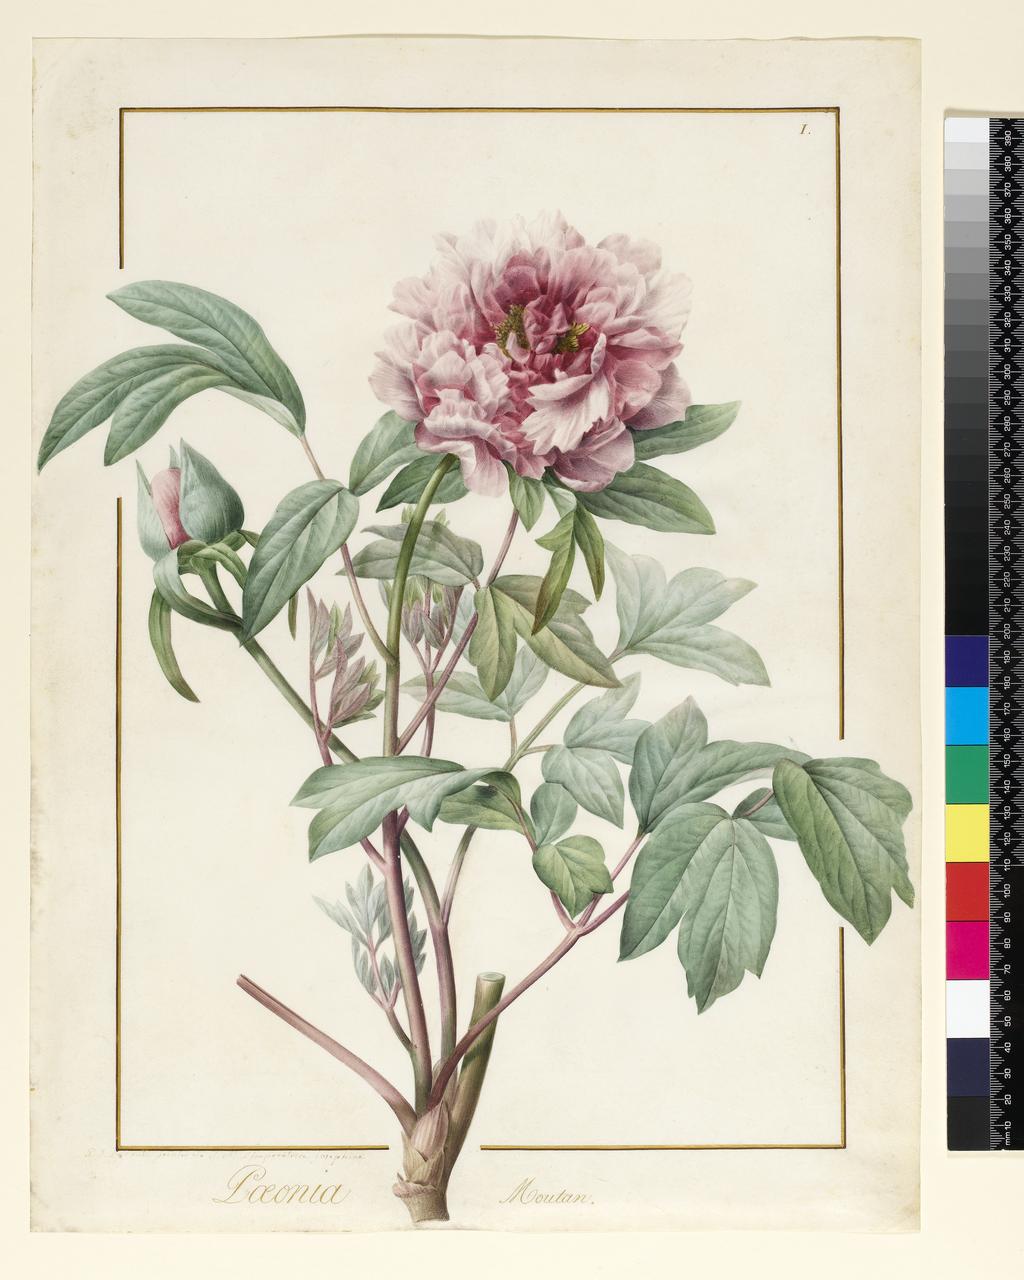 An image of Paeonia Montan. Redouté, Pierre Joseph (Flemish, 1759-1840). Graphite and watercolour on vellum, margins ruled in red and gold ink, height 460 mm, width 344 mm.